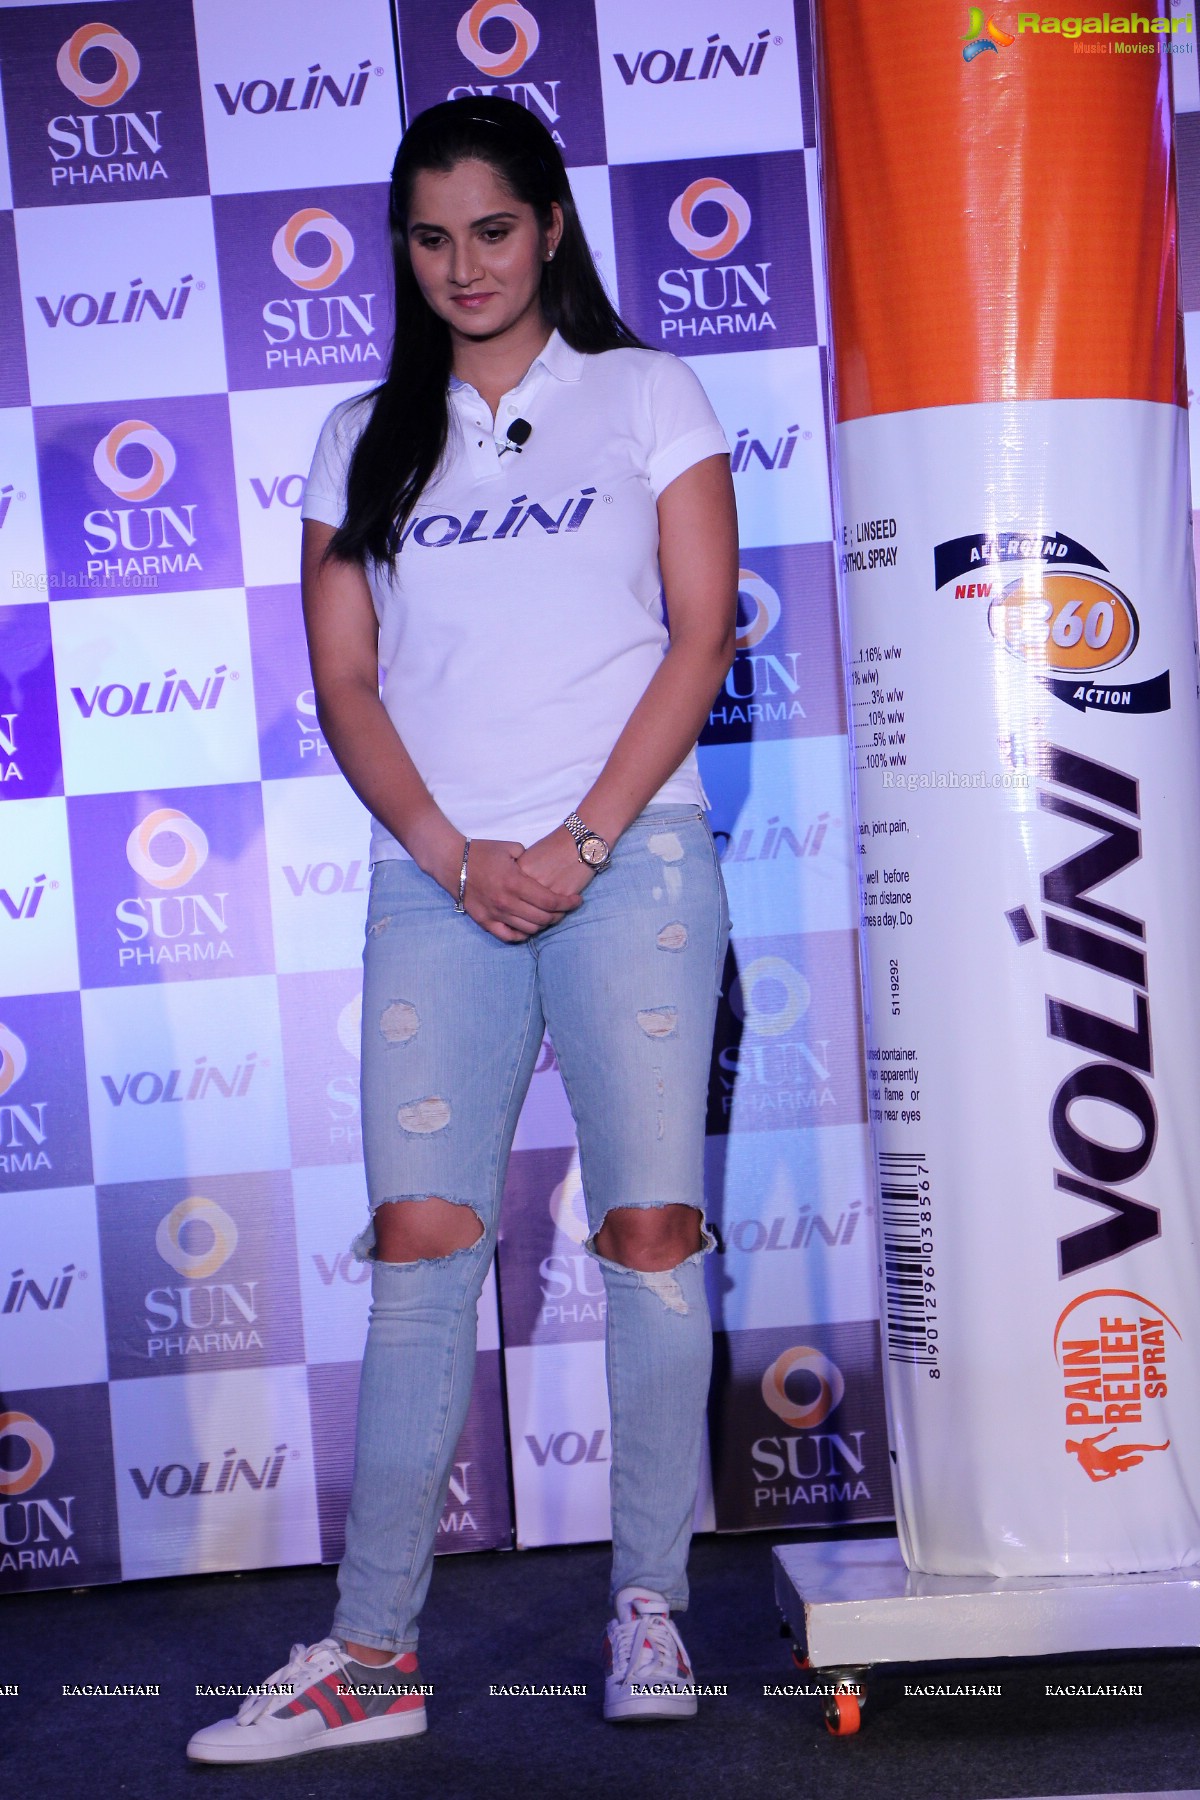 Sania Mirza launches New Volini Spray with 360 Degree Technology in Hyderabad